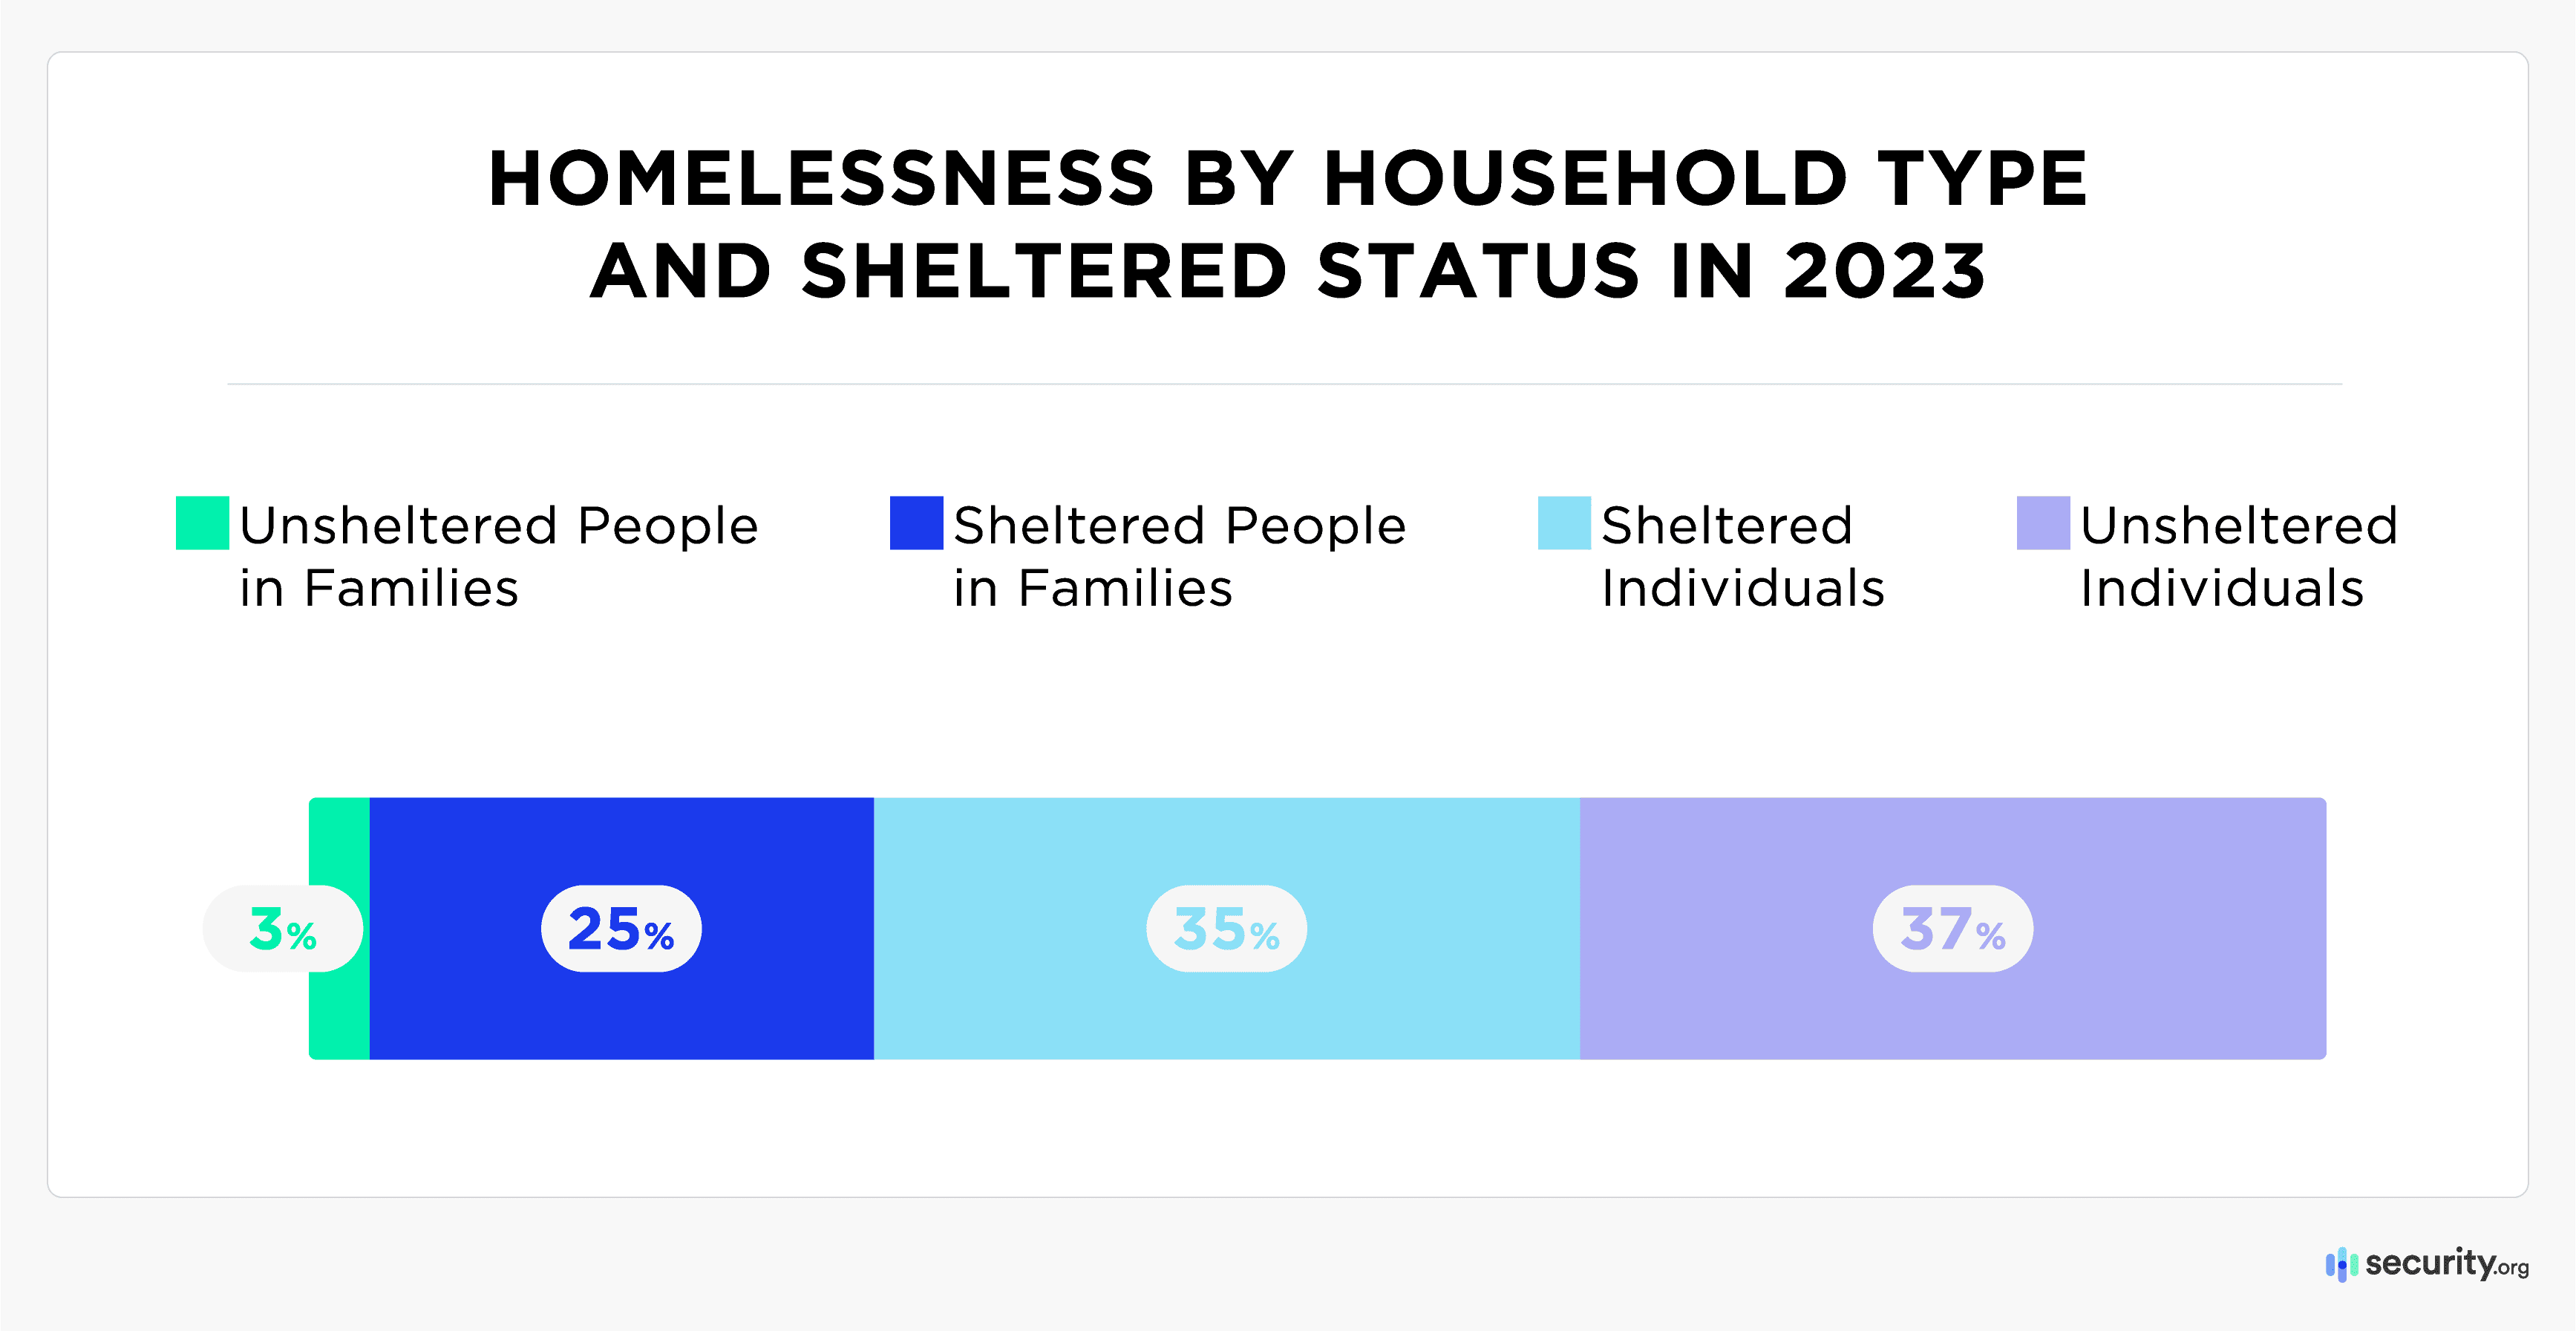 Homelessness by household type and sheltered status in 2023